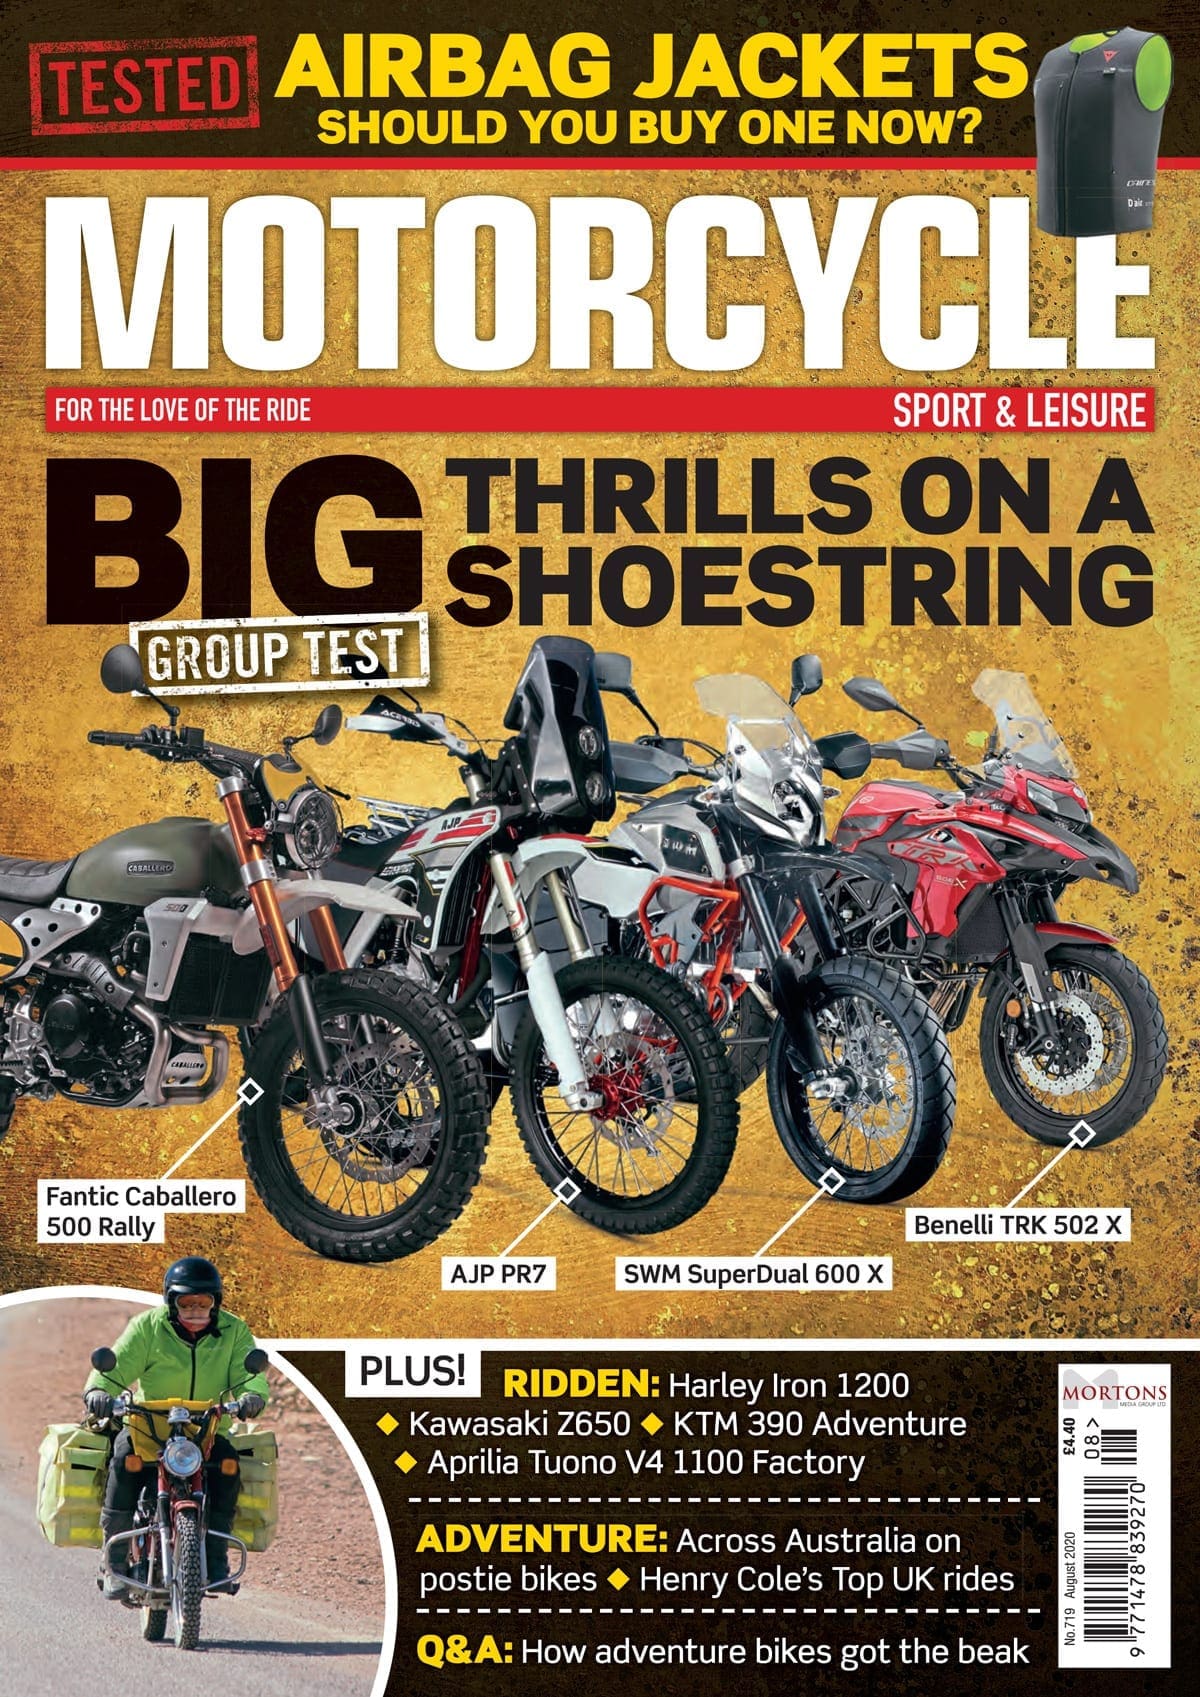 PREVIEW: Motorcycle Sport & Leisure August edition